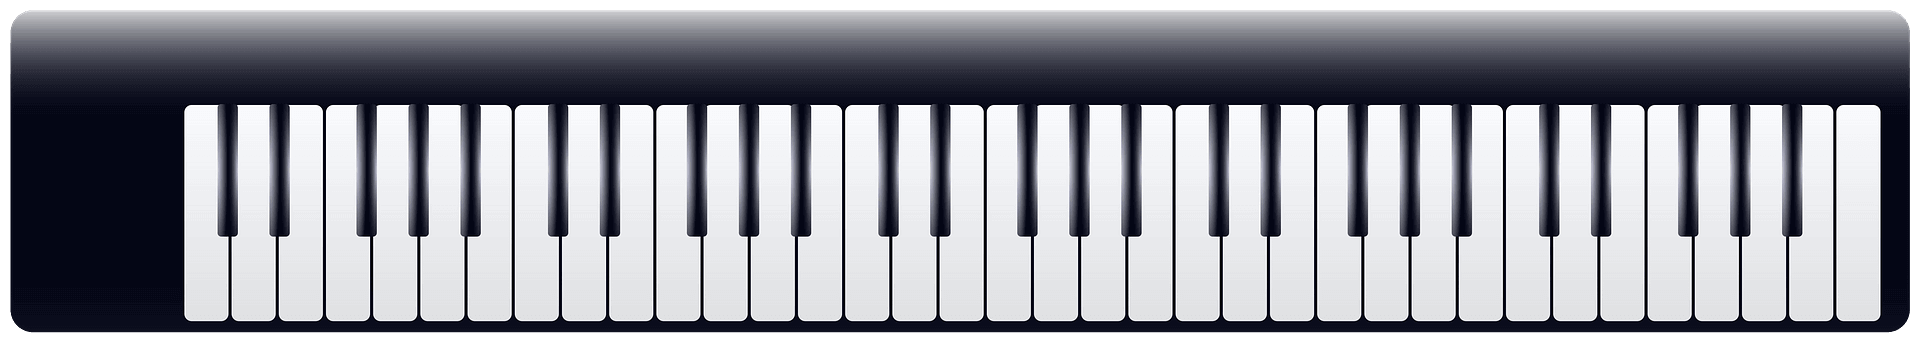 Piano Keyboard clipart transparent